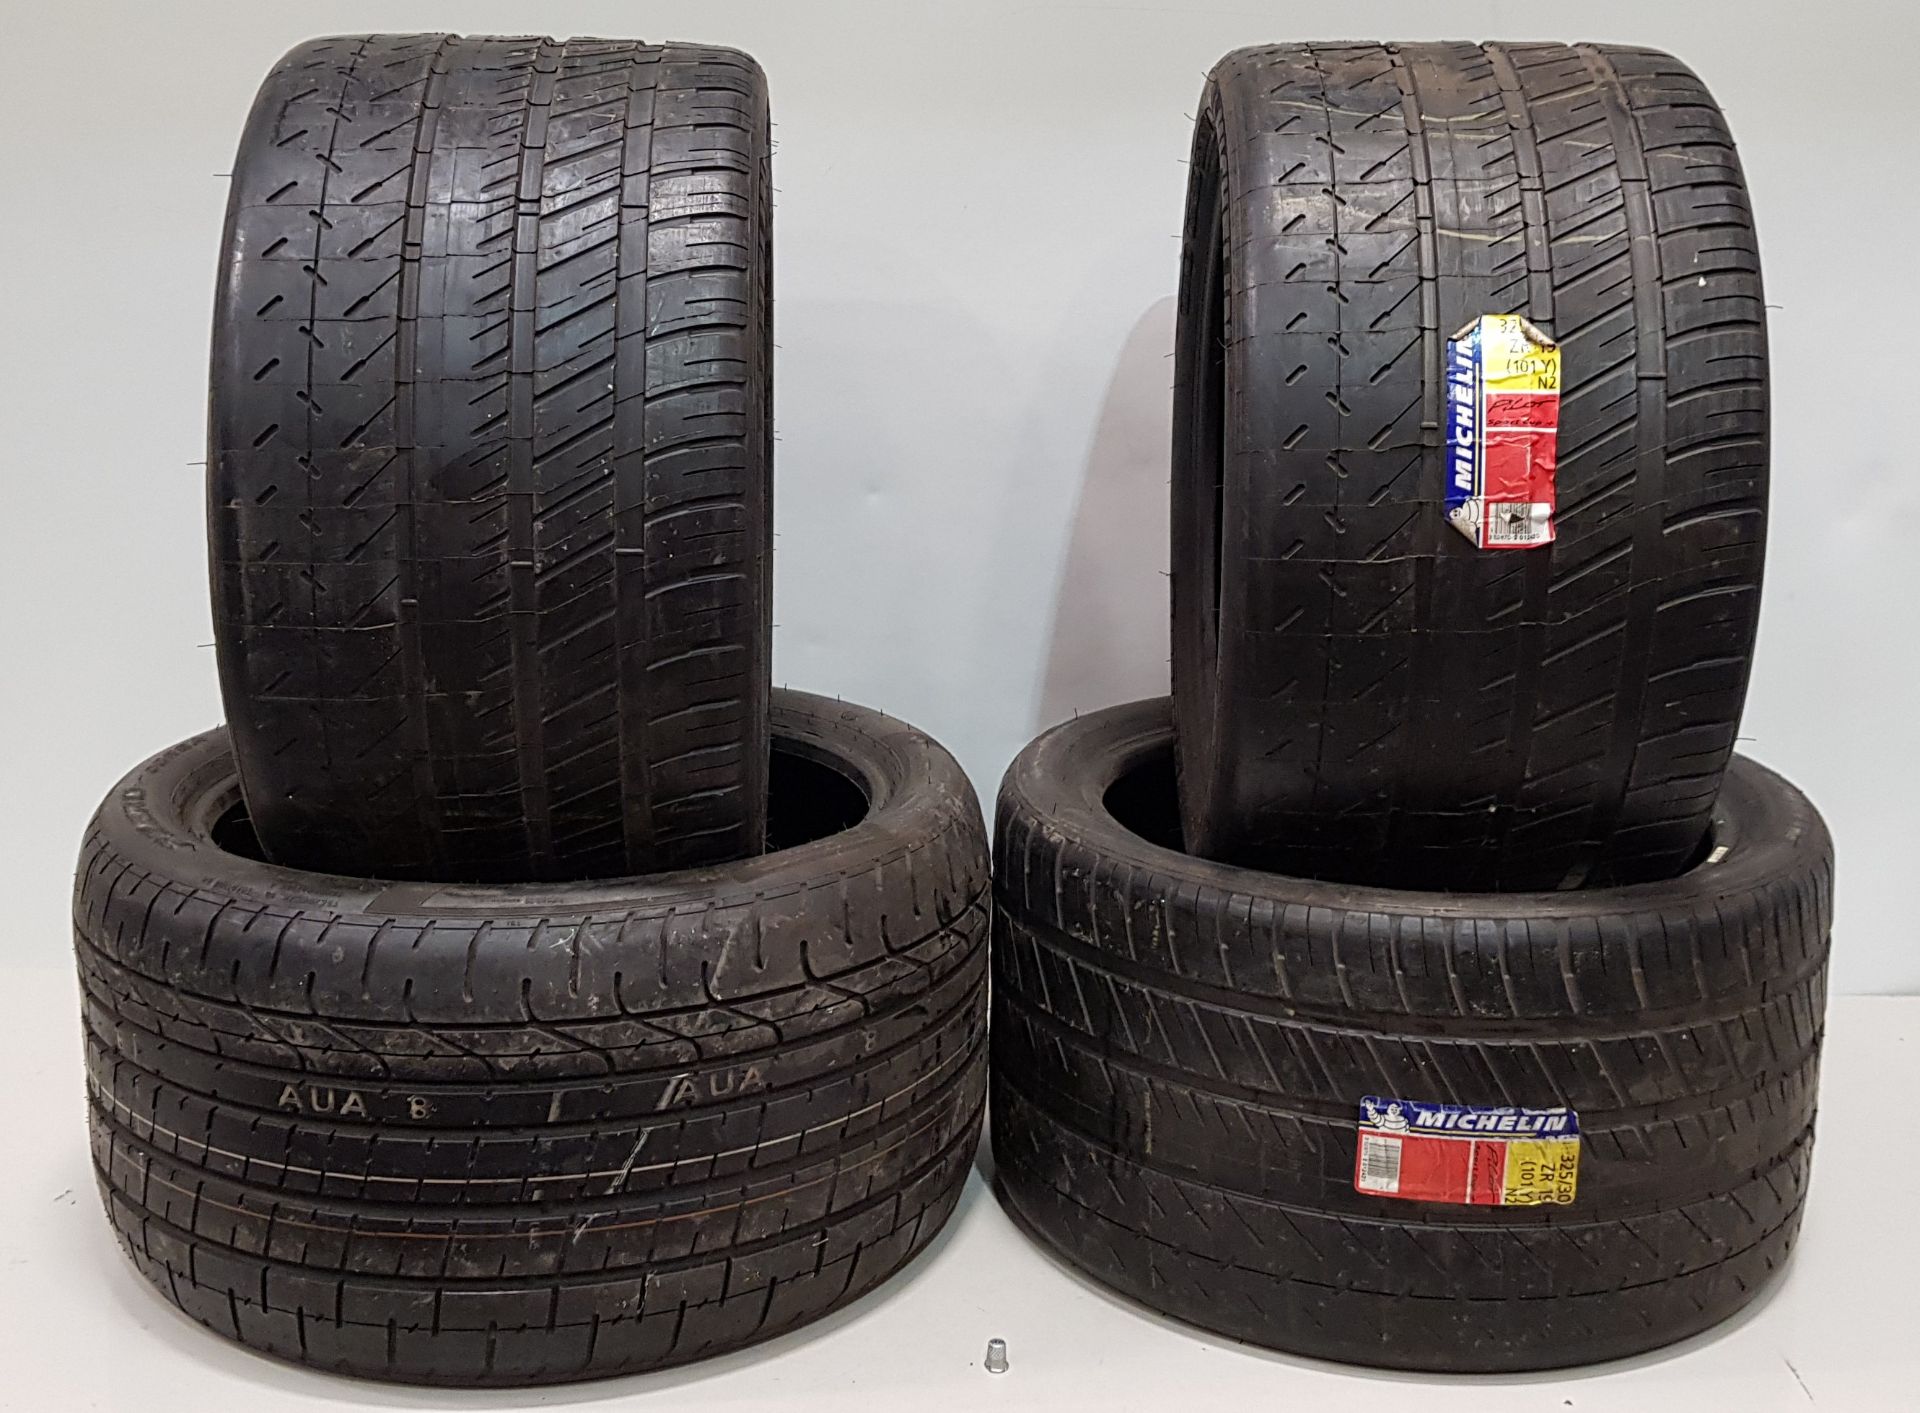 4 X MIXED TYRE LOT CONTAINING 2 X BRAND NEW MICHELIAN TYRES SIZE 325/30 ZR 19 - 1 X PART WORN